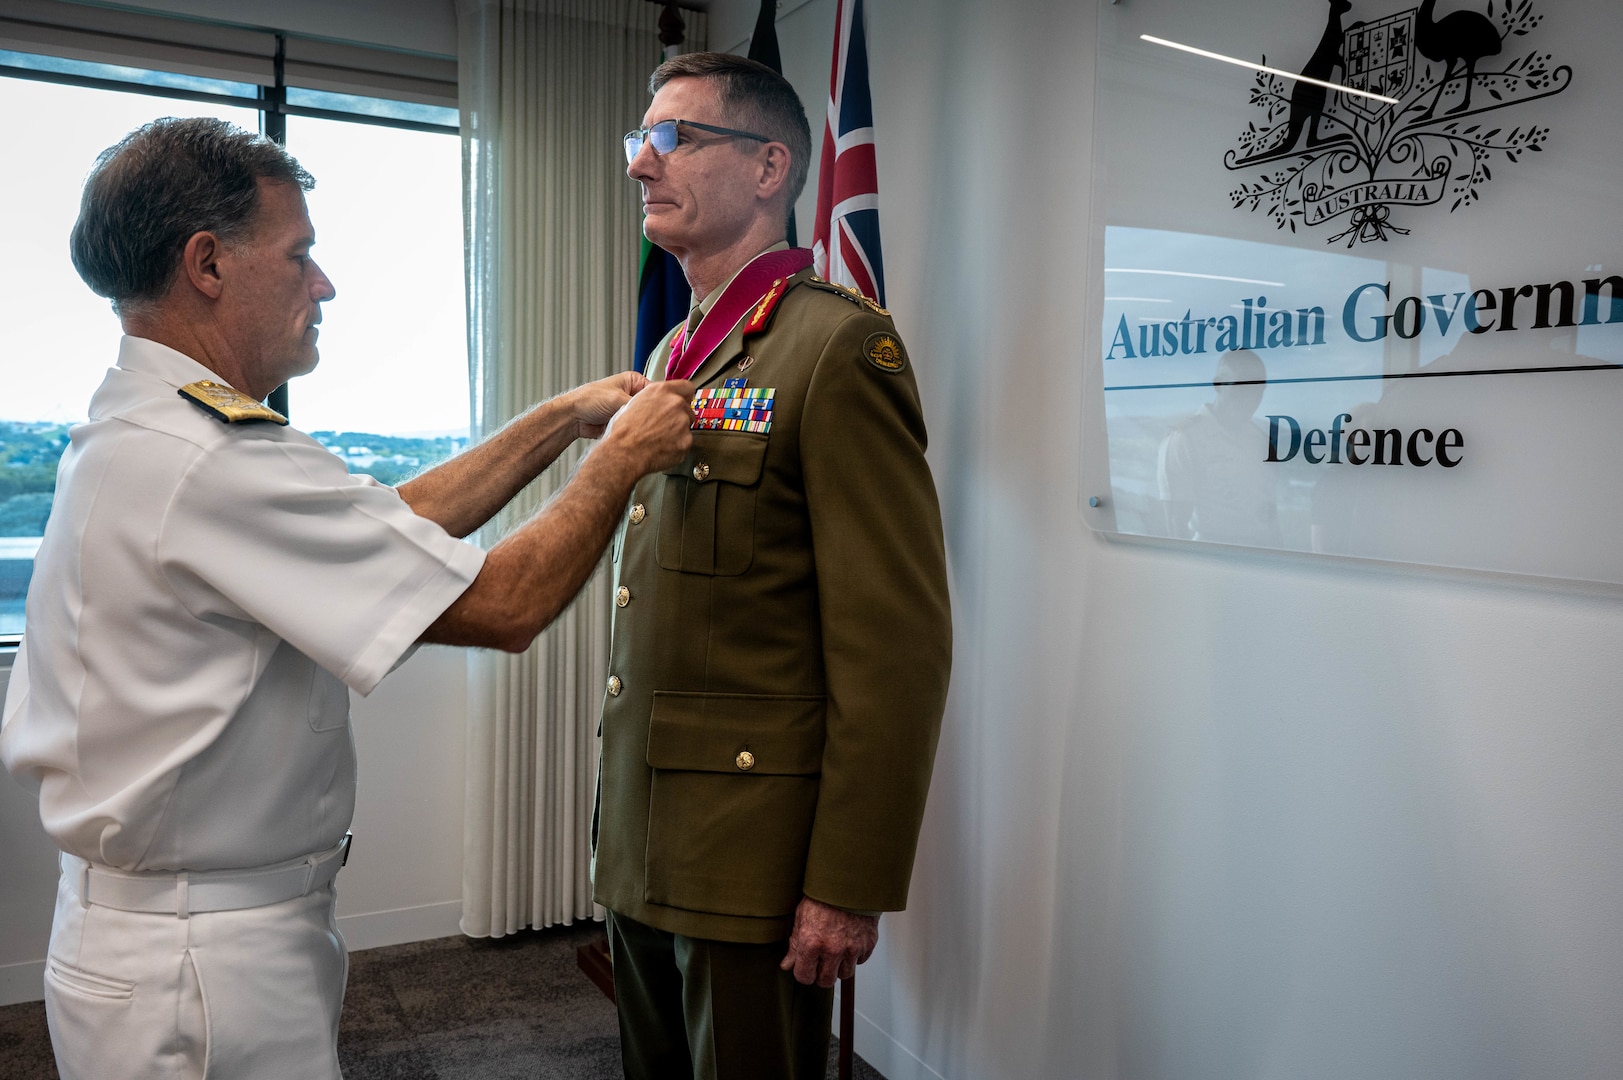 Australia Chief of the Defence Force Gen. Angus Campbell receives the Legion of Merit pinned by Adm. John C. Aquilino, Commander of U.S. Indo-Pacific Command, in Canberra, Australia, on April 8, 2024. The Legion of Merit is the highest accolade that the U.S. can bestow upon a foreign leader; it is reserved for individuals who have shown exceptionally meritorious conduct in the performance of outstanding services. USINDOPACOM is committed to enhancing stability in the Indo-Pacific region by promoting security cooperation, encouraging peaceful development, responding to contingencies, deterring aggression and, when necessary, fighting to win. (U.S. Navy photo by Chief Mass Communication Specialist Shannon M. Smith)